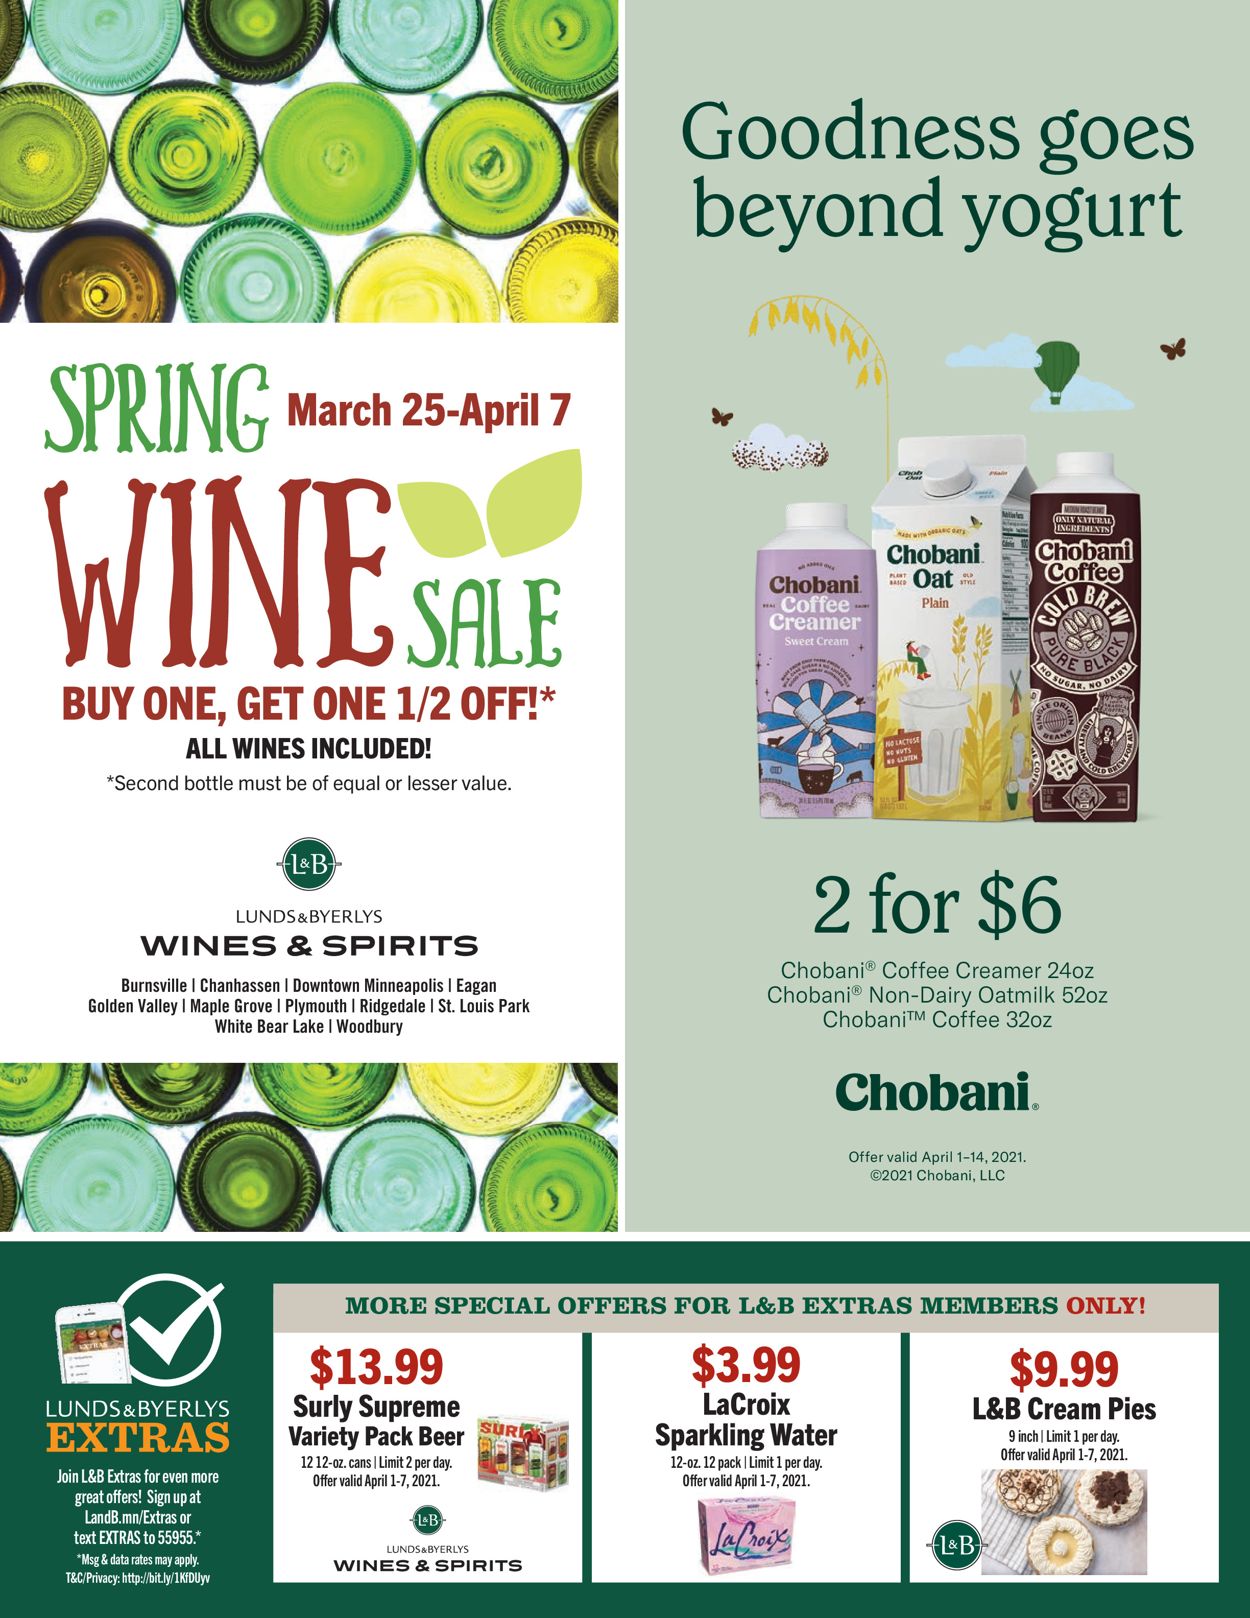 Lunds & Byerlys Ad from 04/01/2021